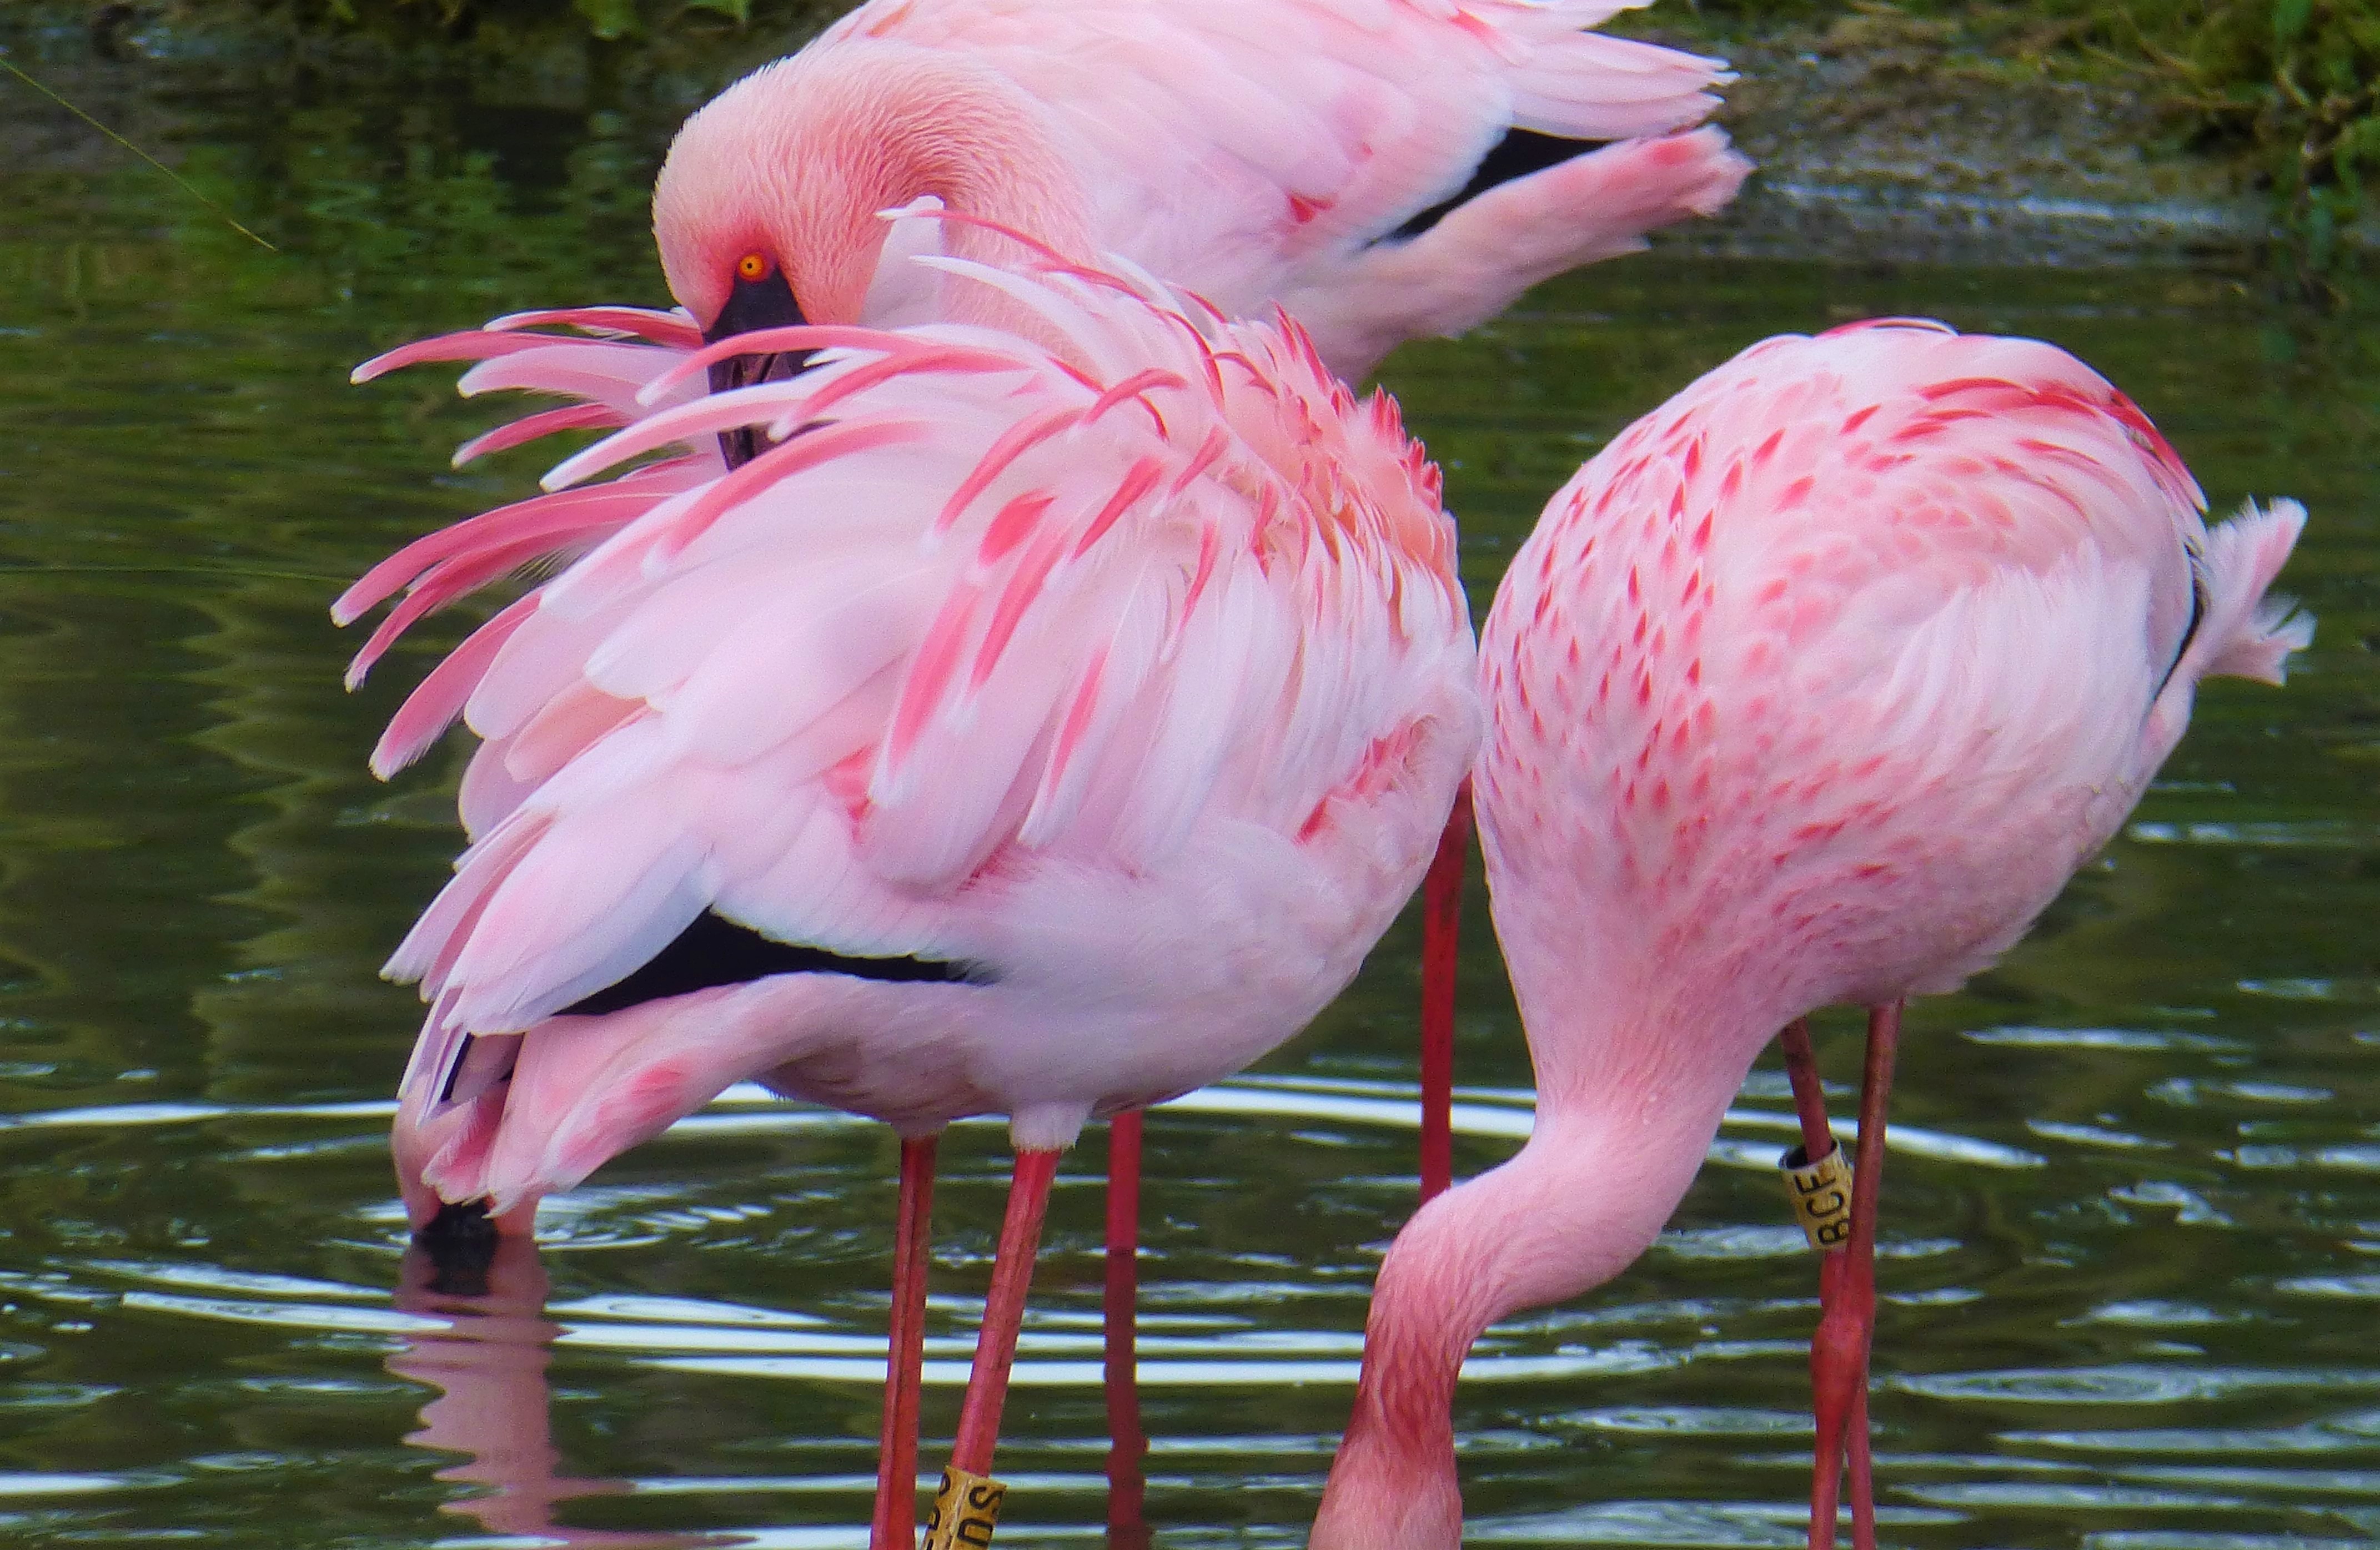 Hot pink flamingos? Flamingo care in warm weather